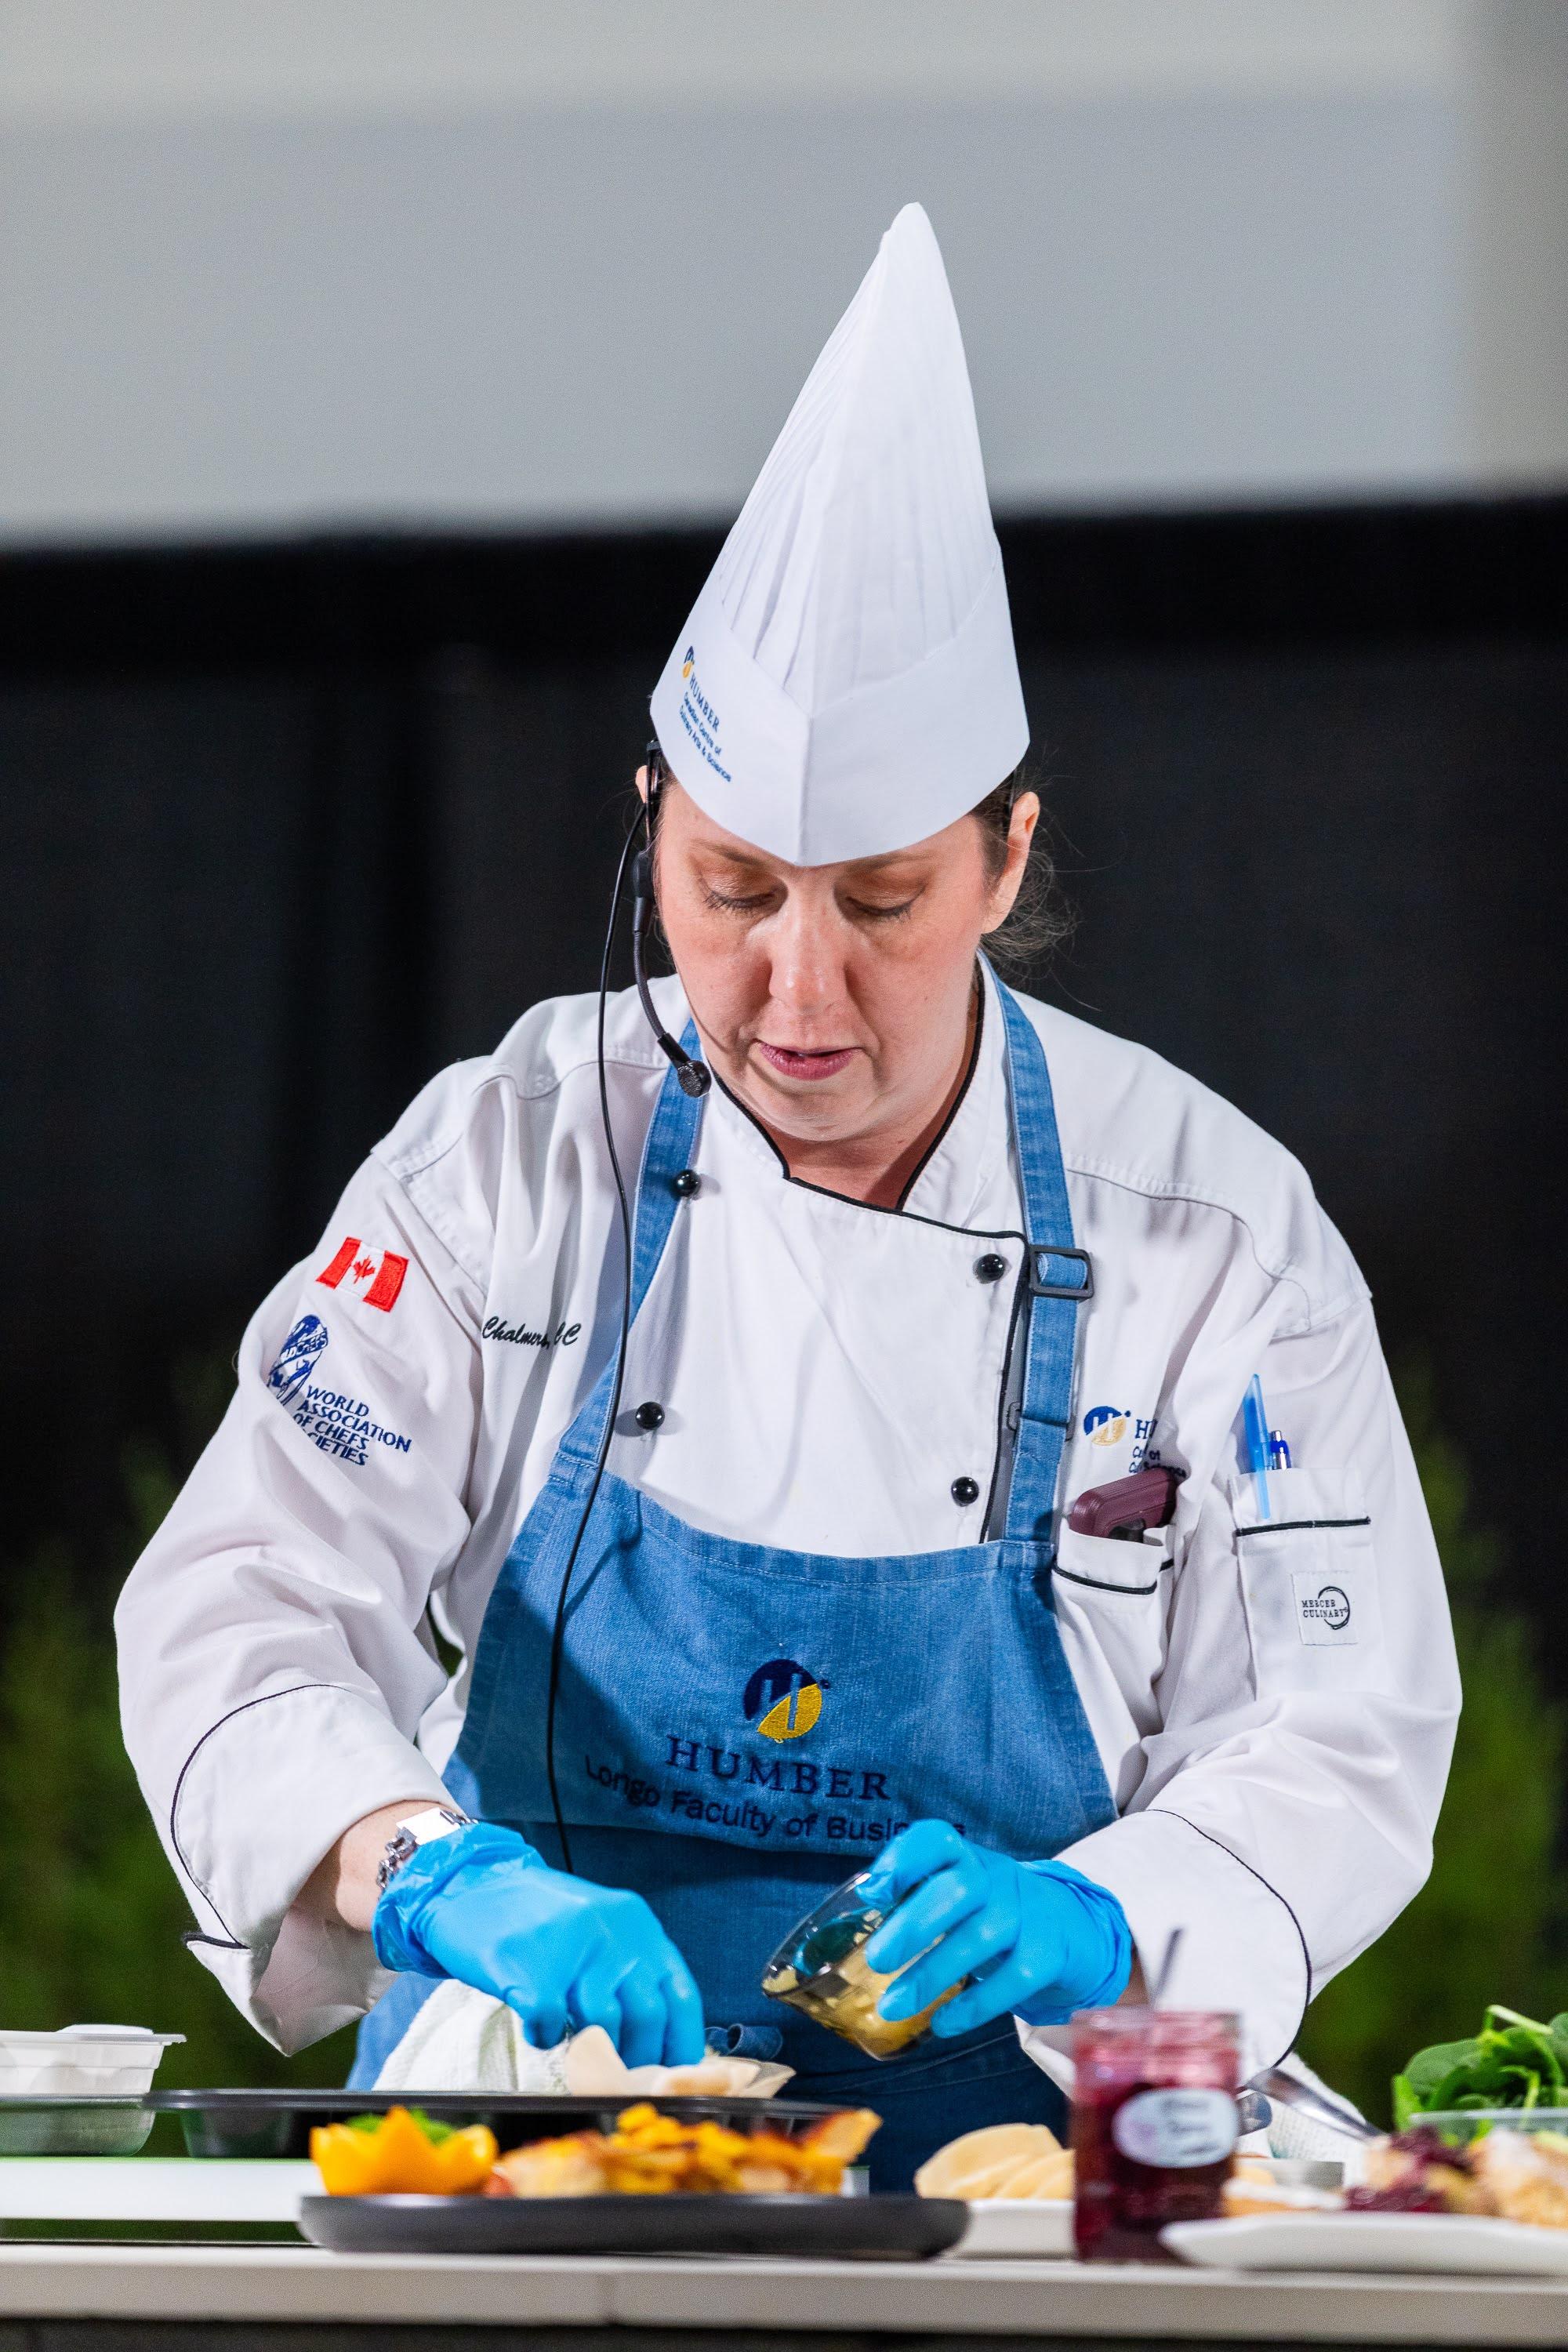 A person wearing a chef uniform puts food on a plate.